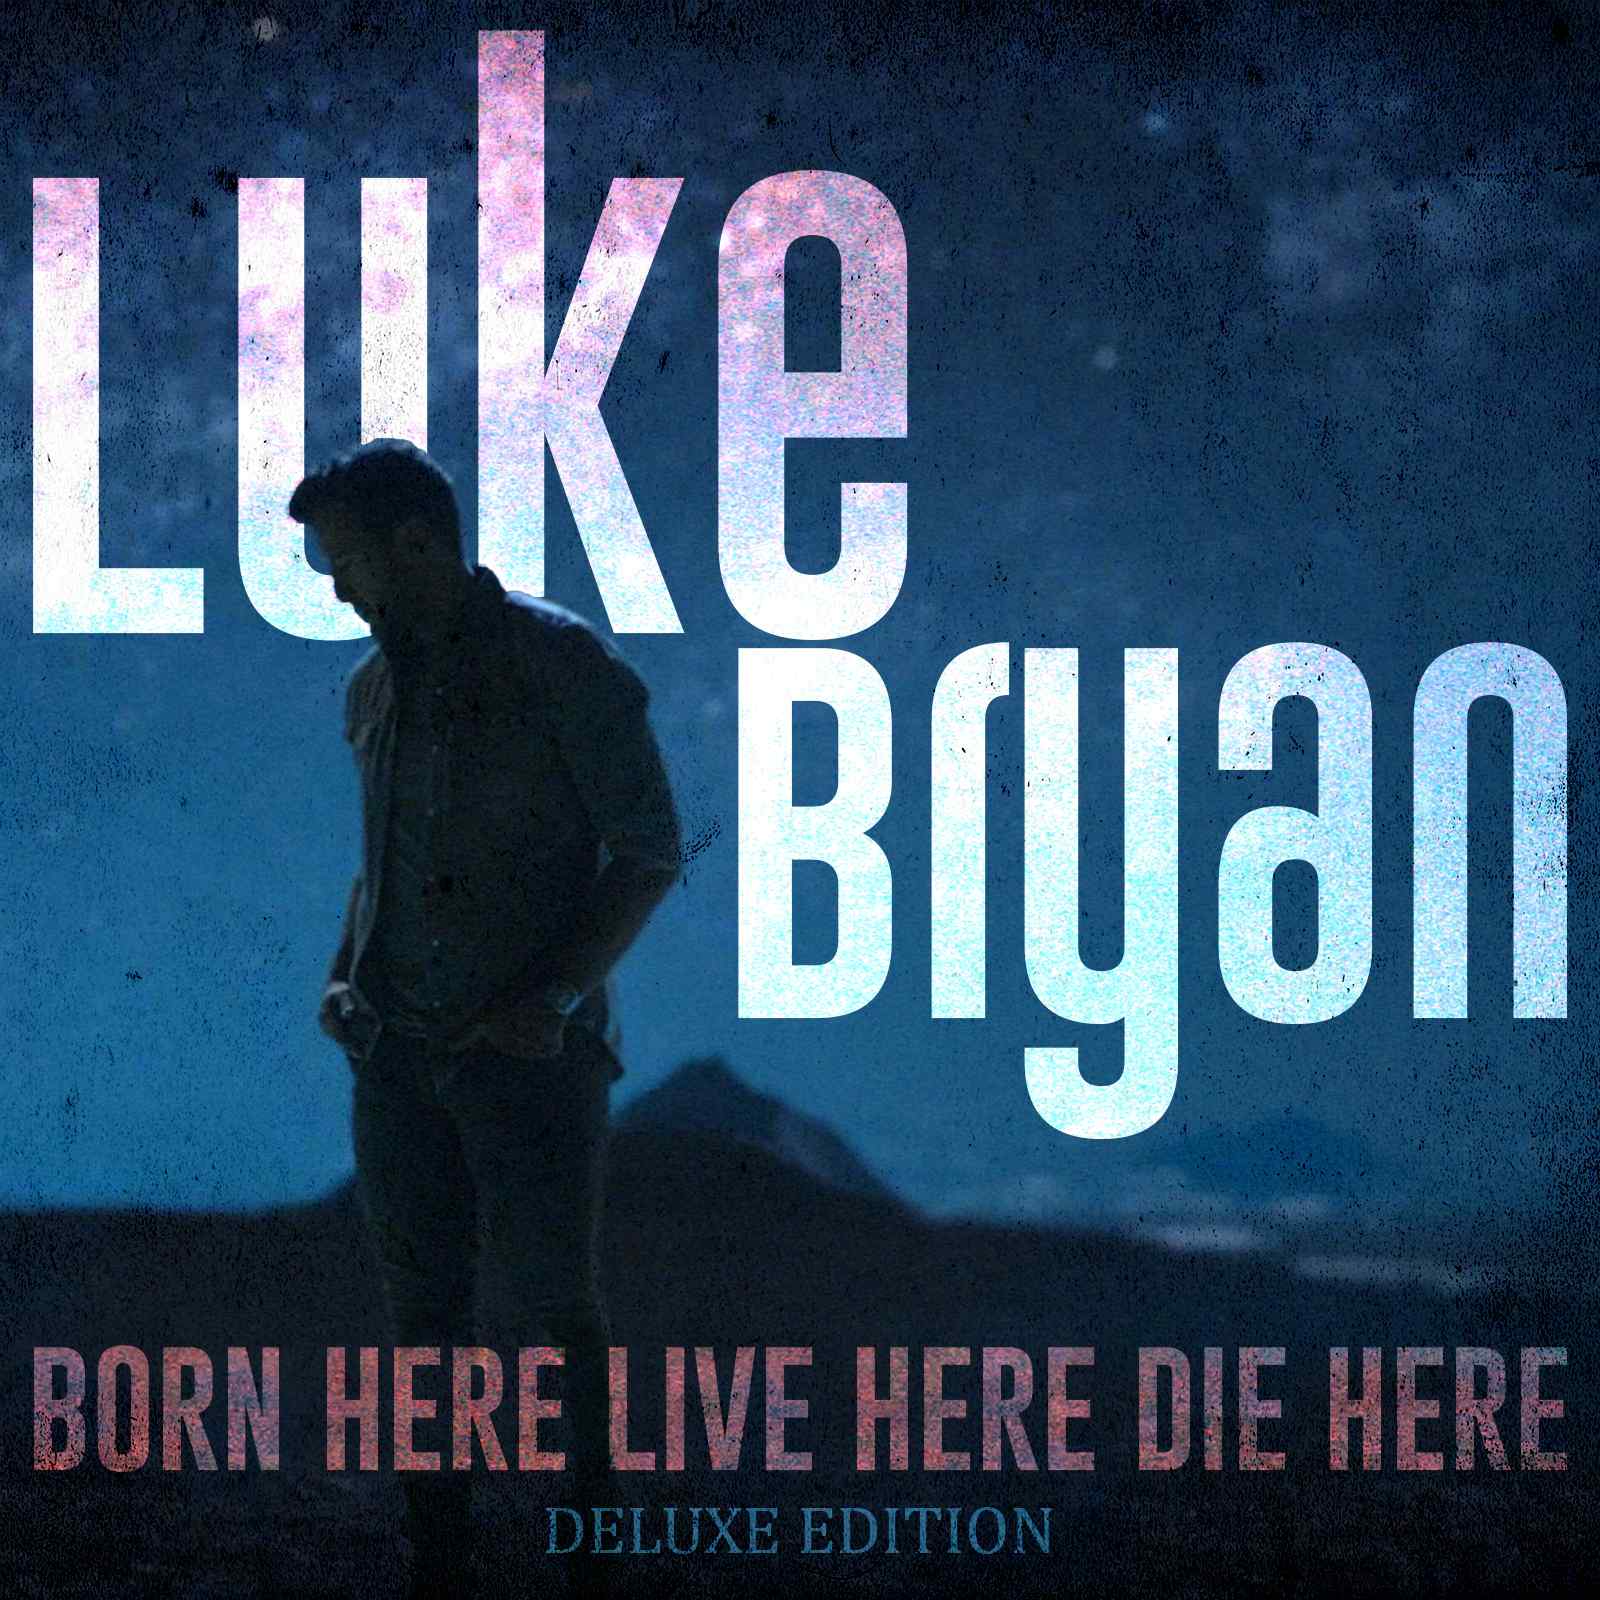 Luke Bryan to Release Deluxe Edition of his #1 Album BORN HERE LIVE HERE DIE HERE (Deluxe Edition) April 9, 2021